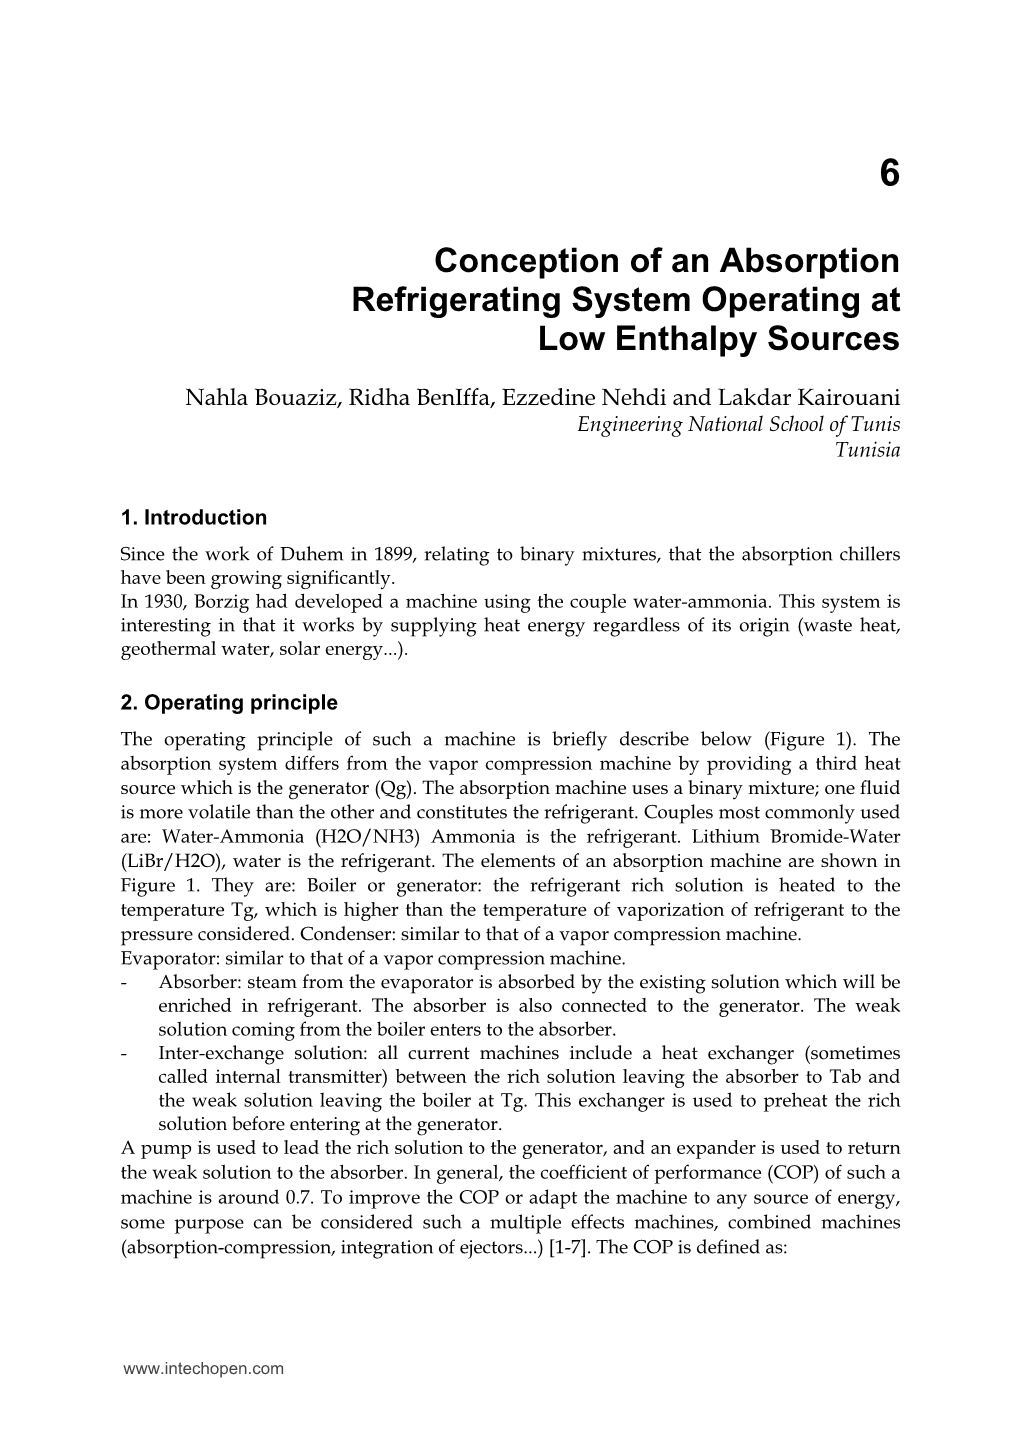 Conception of an Absorption Refrigerating System Operating at Low Enthalpy Sources